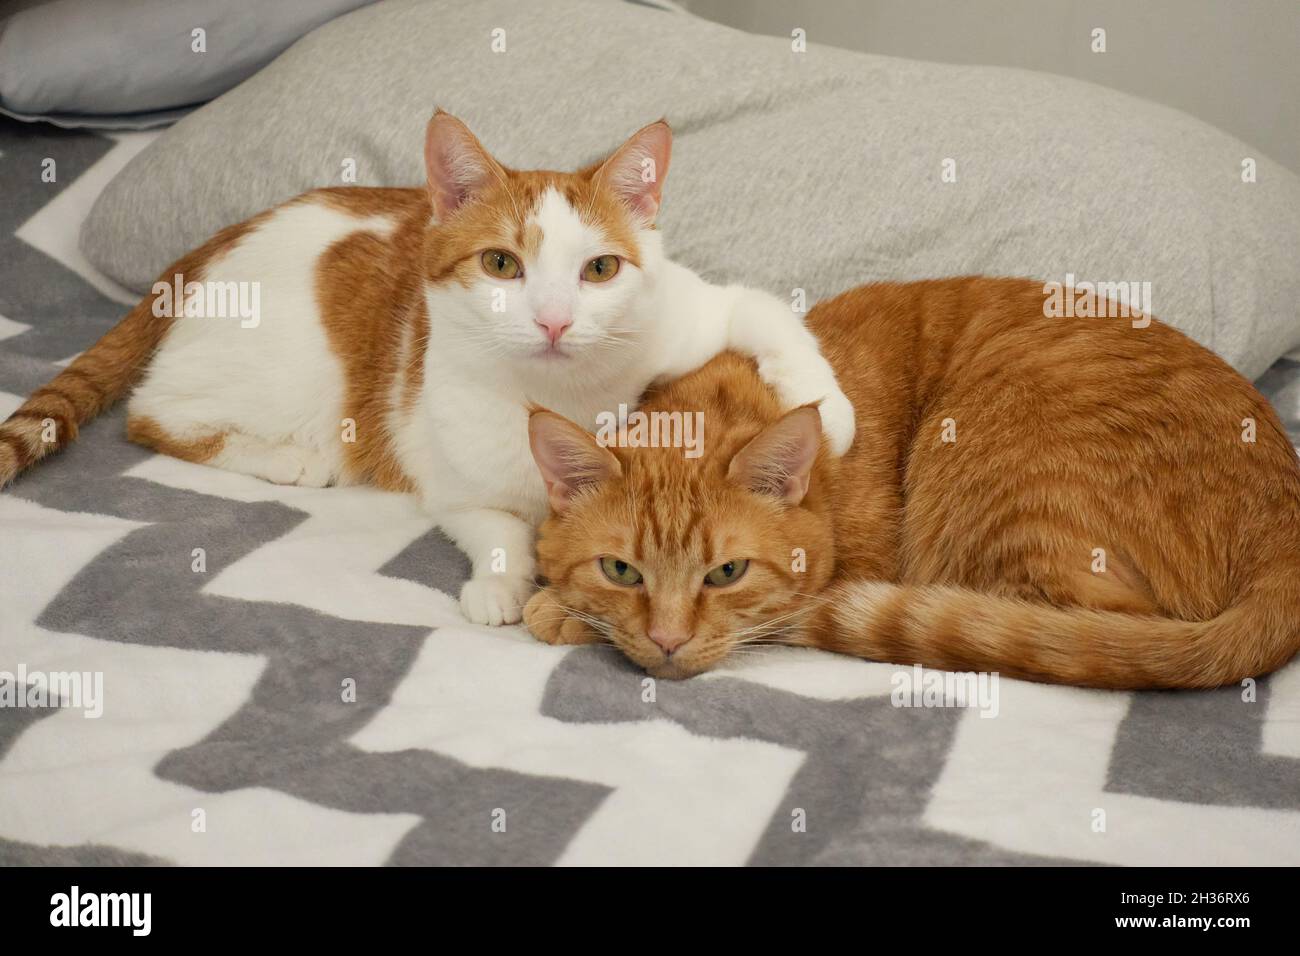 Domesticated cats leisure time or rest concept. White and red cat making a hug with cute lazy ginger tabby cat on a bed with gray blanket near the pillow. High quality photo Stock Photo